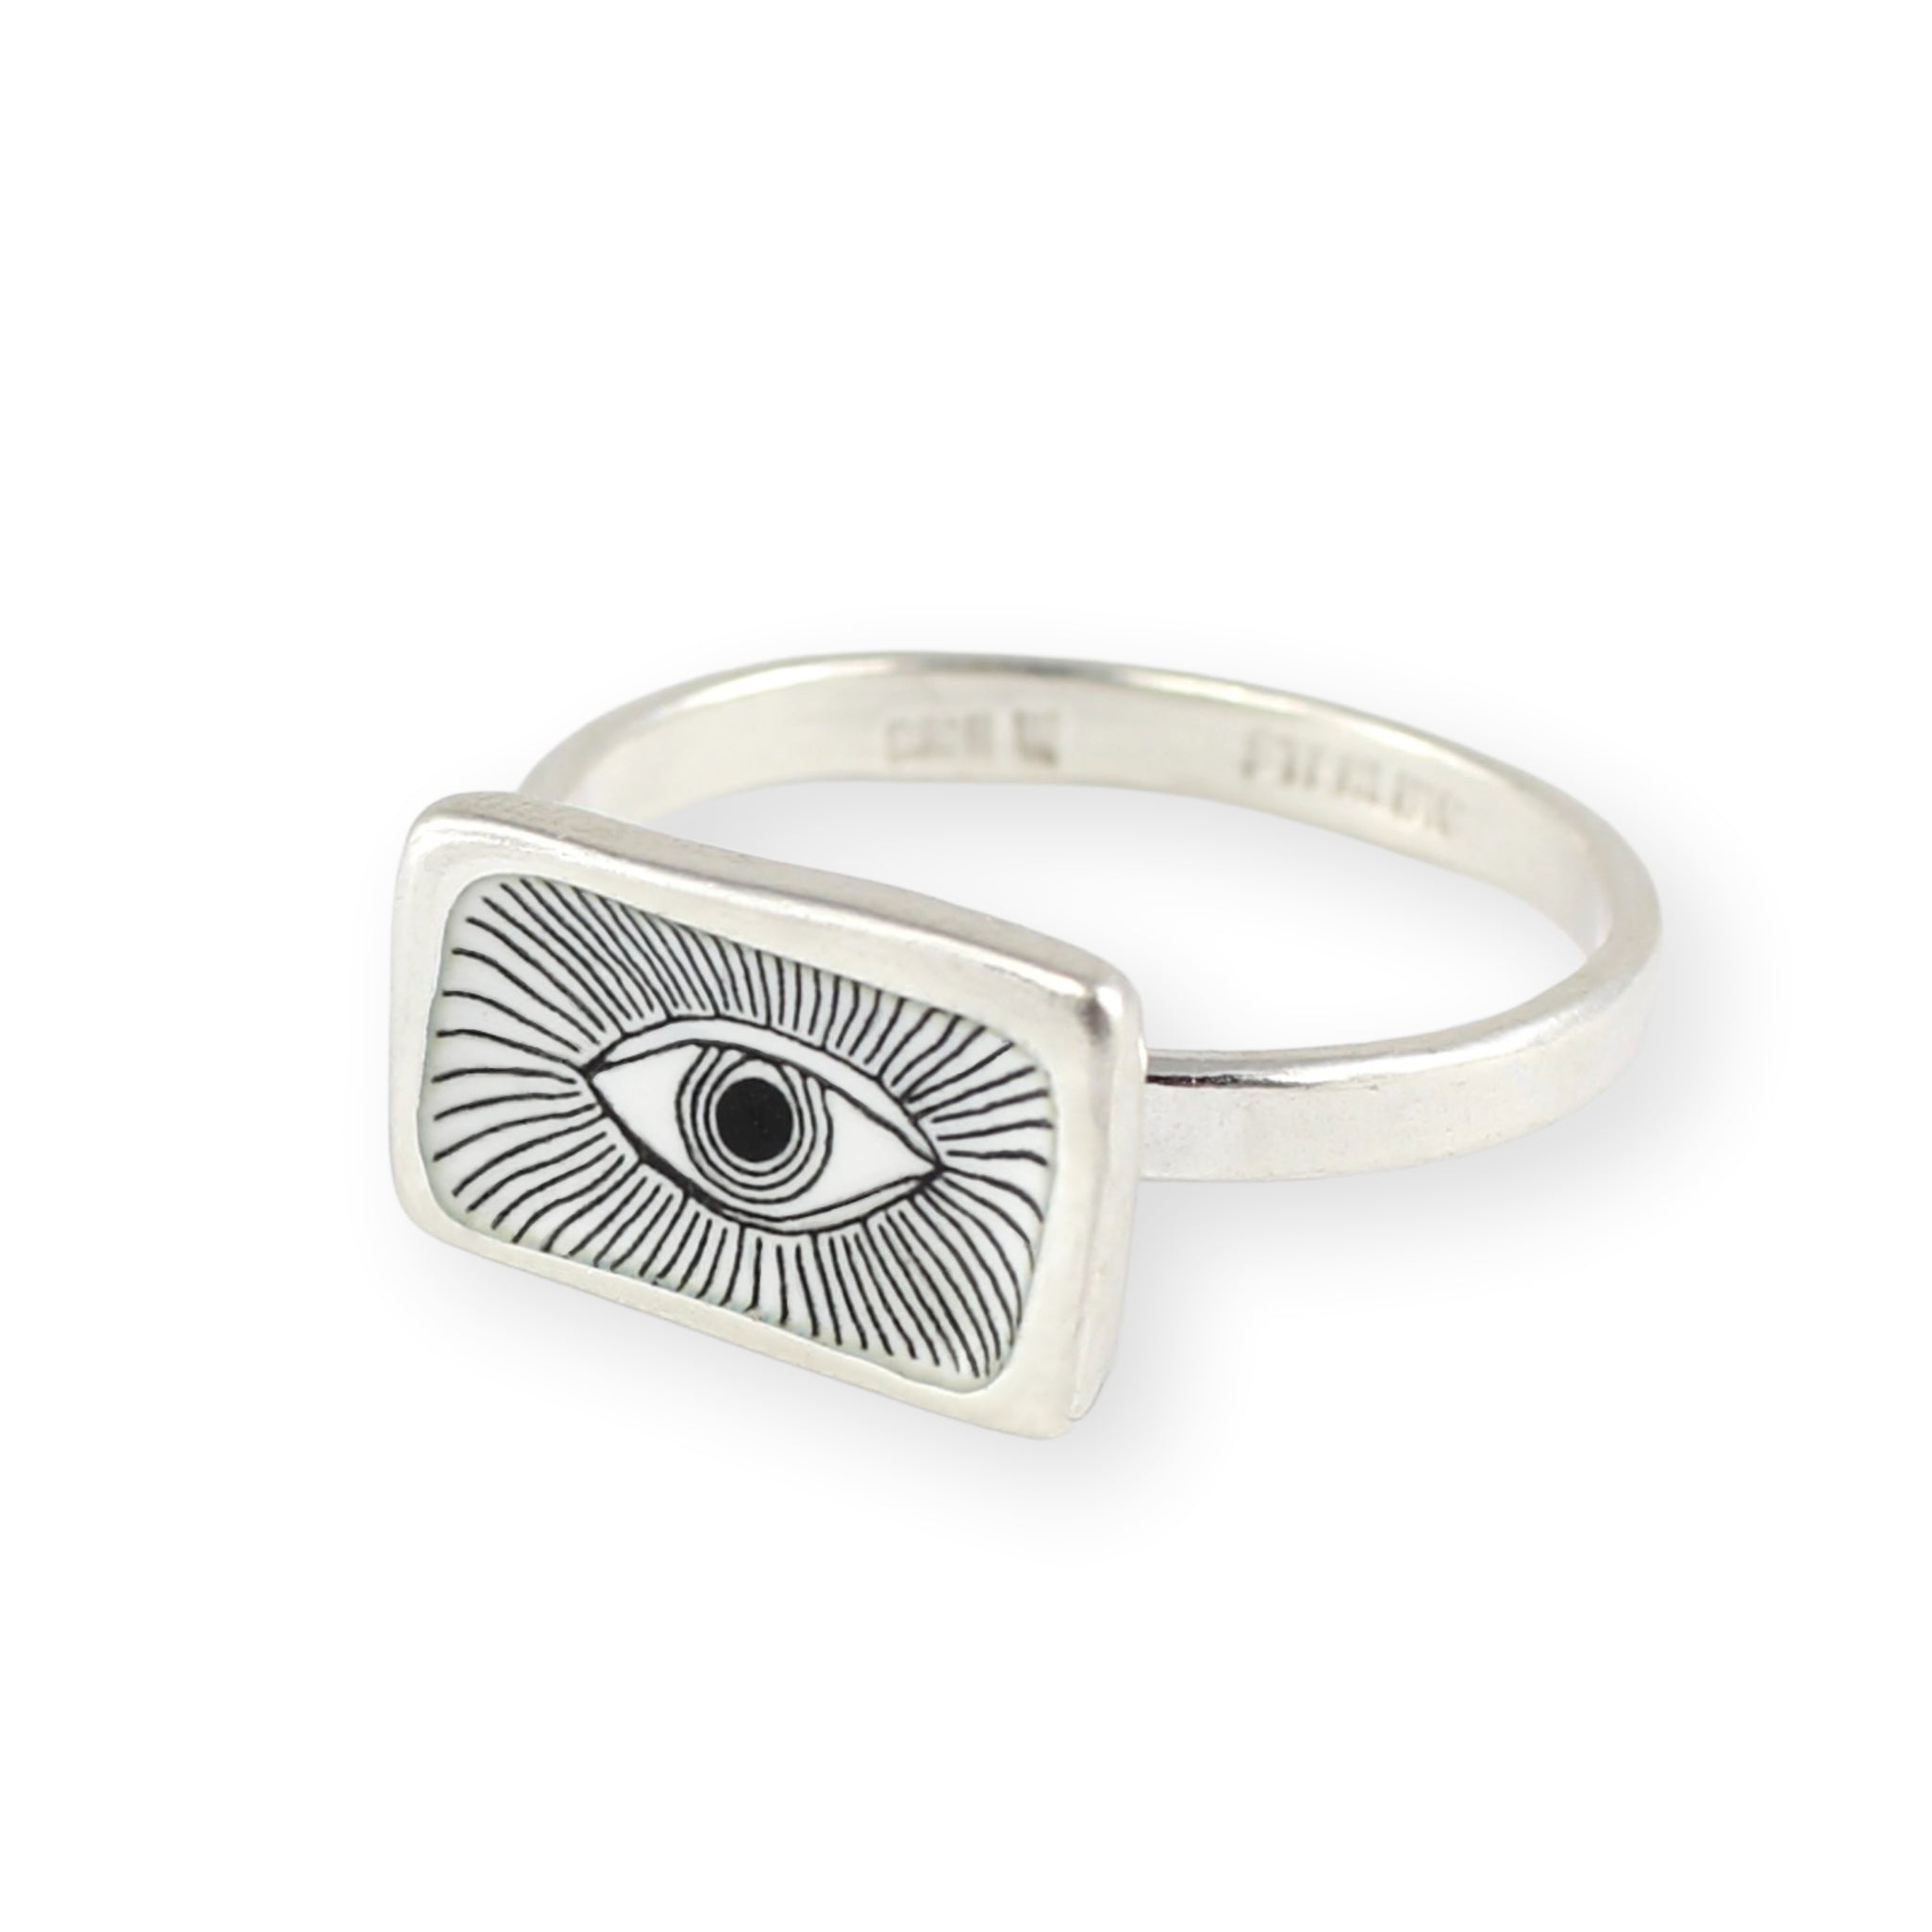 Buy Sterling Silver Small Evil Eye Ring, Silver Ring, Eye Ring, Protector  Ring, Dainty Ring Online in India - Etsy